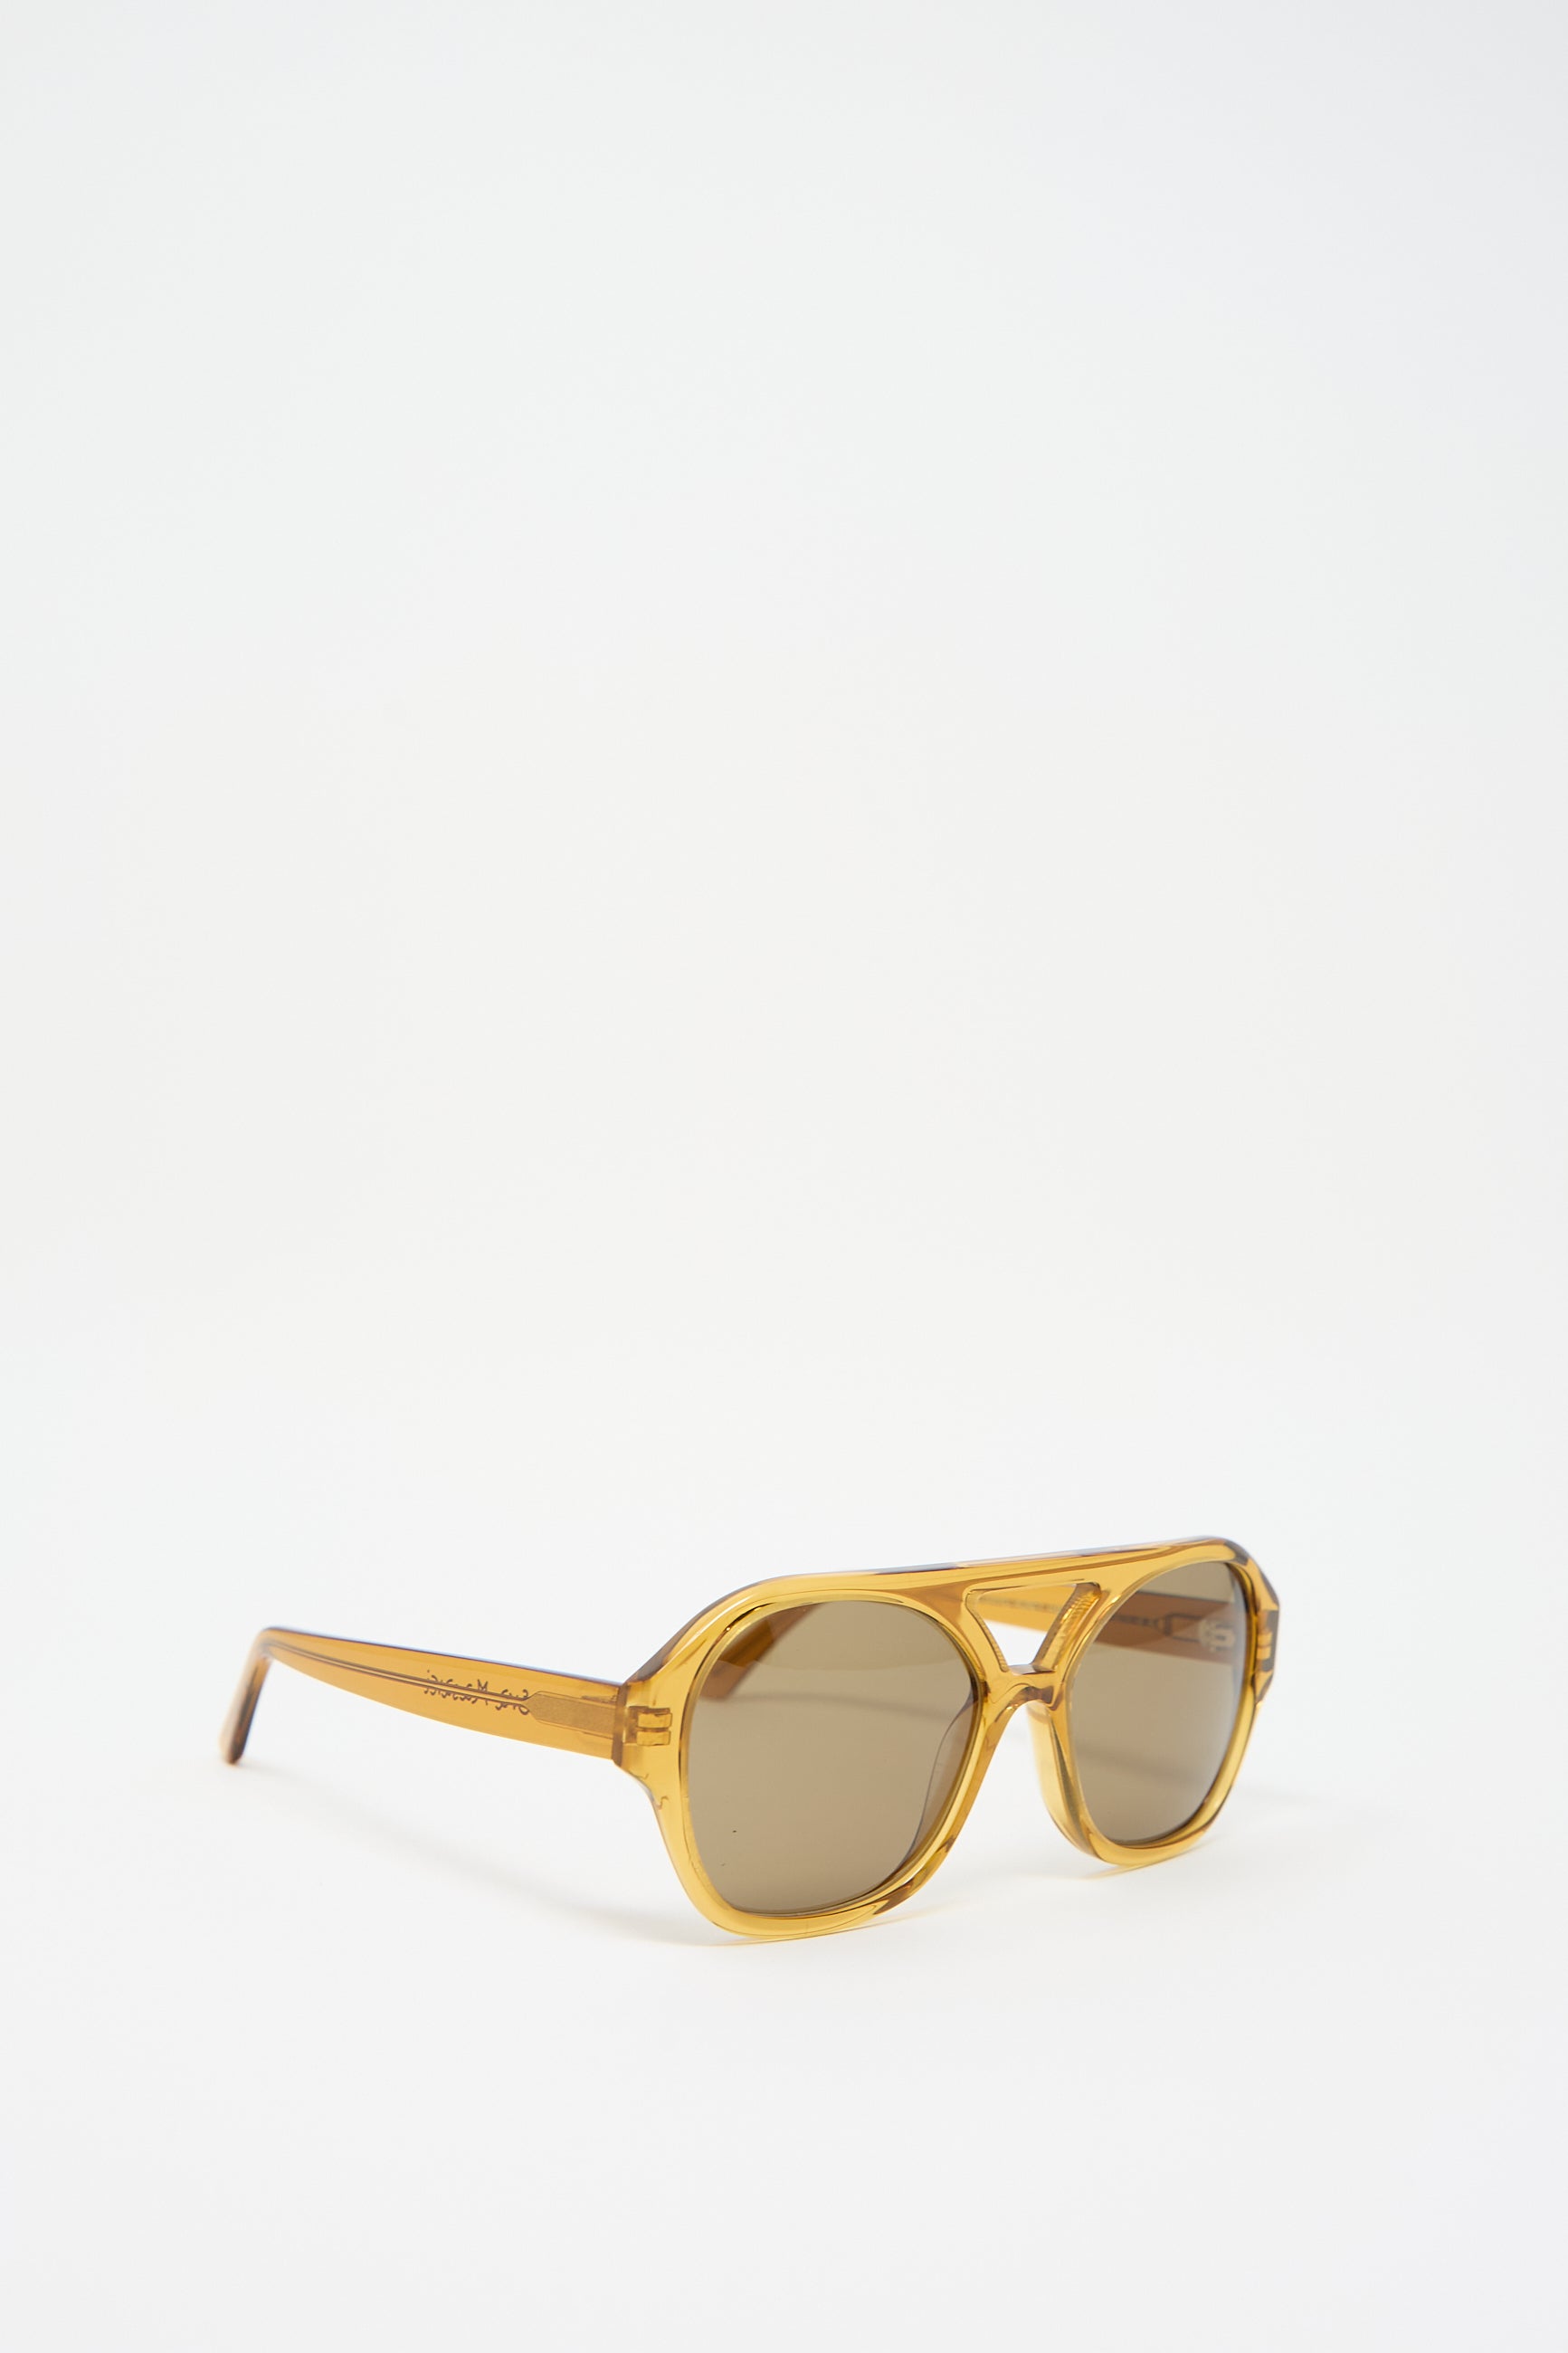 A pair of Chiyo Aviator Sunglasses in Honey by Eva Masaki with dark lenses, crafted from Italian acetate, is displayed against a white background. These stylish shades not only offer a chic look but also provide superior UV protection for your eyes.